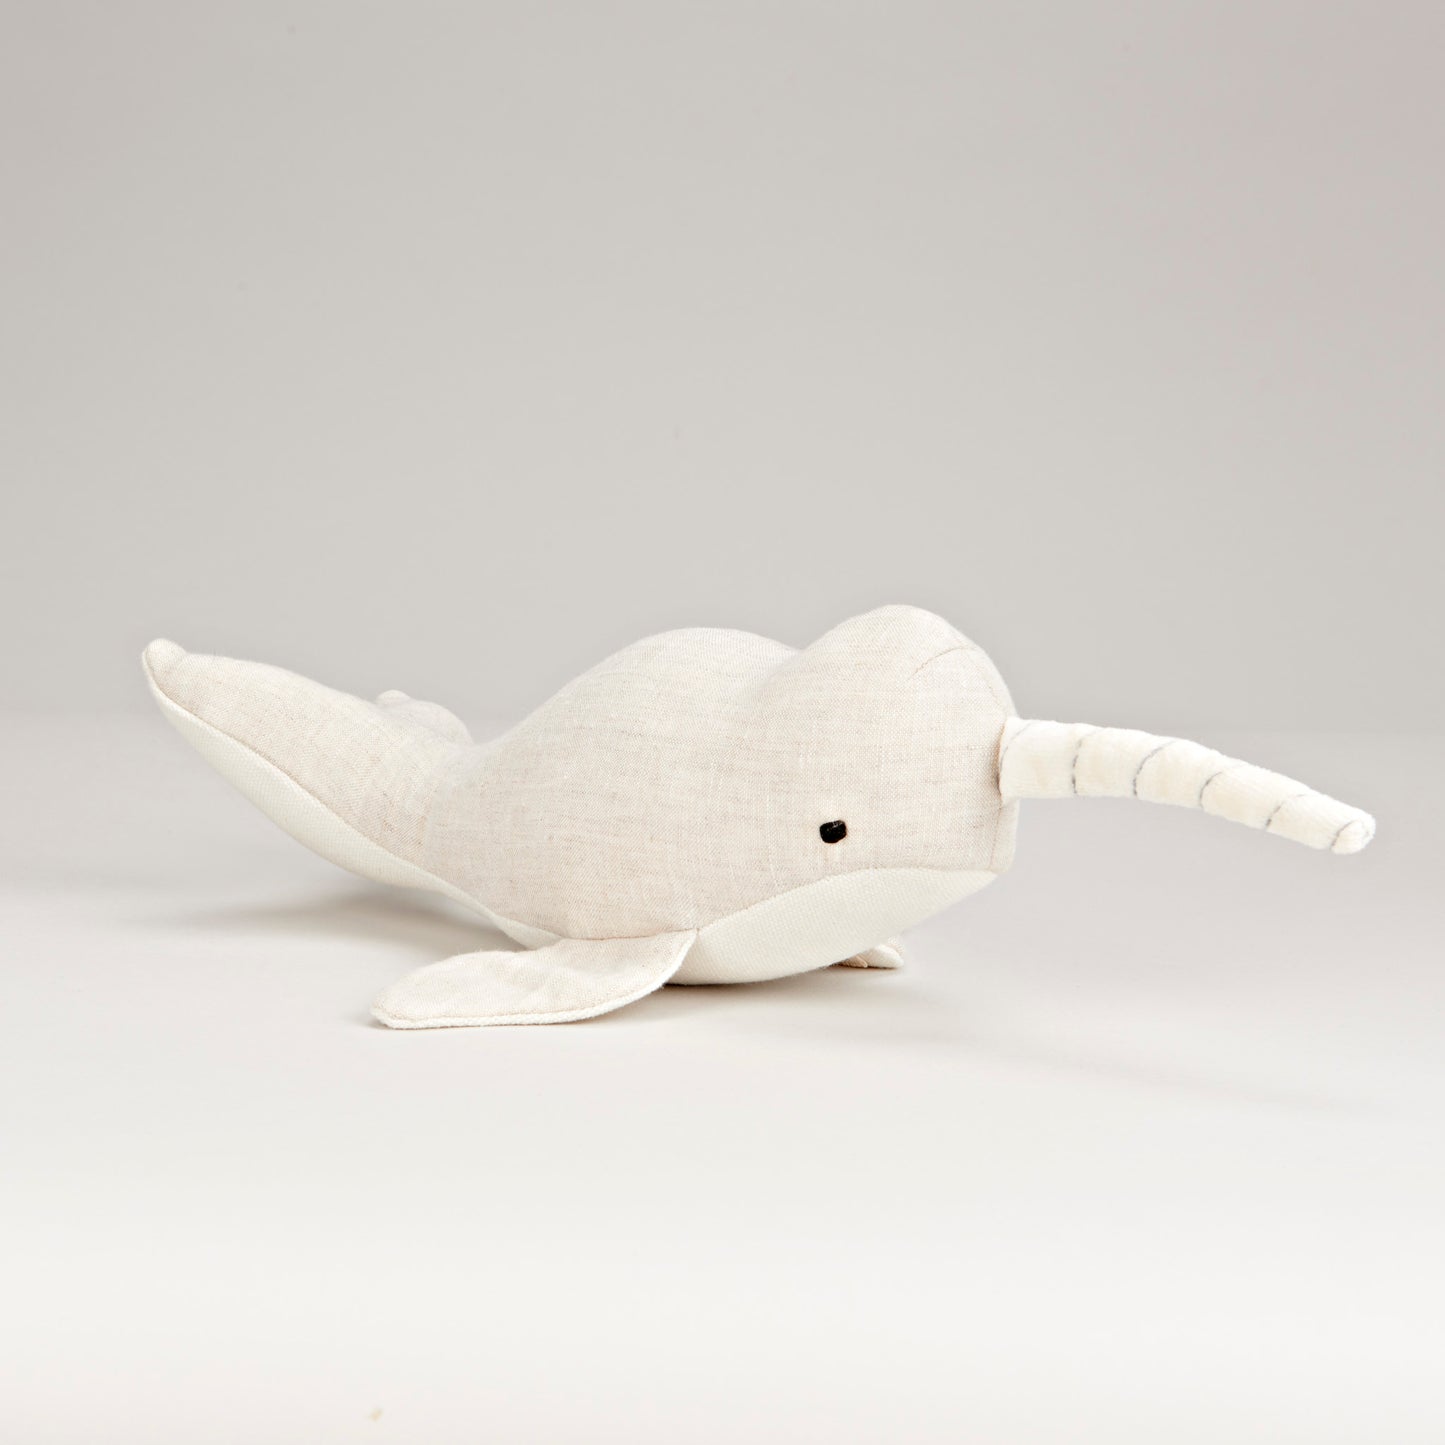 Plush - Narval Narwhal Whale Linen - Natural